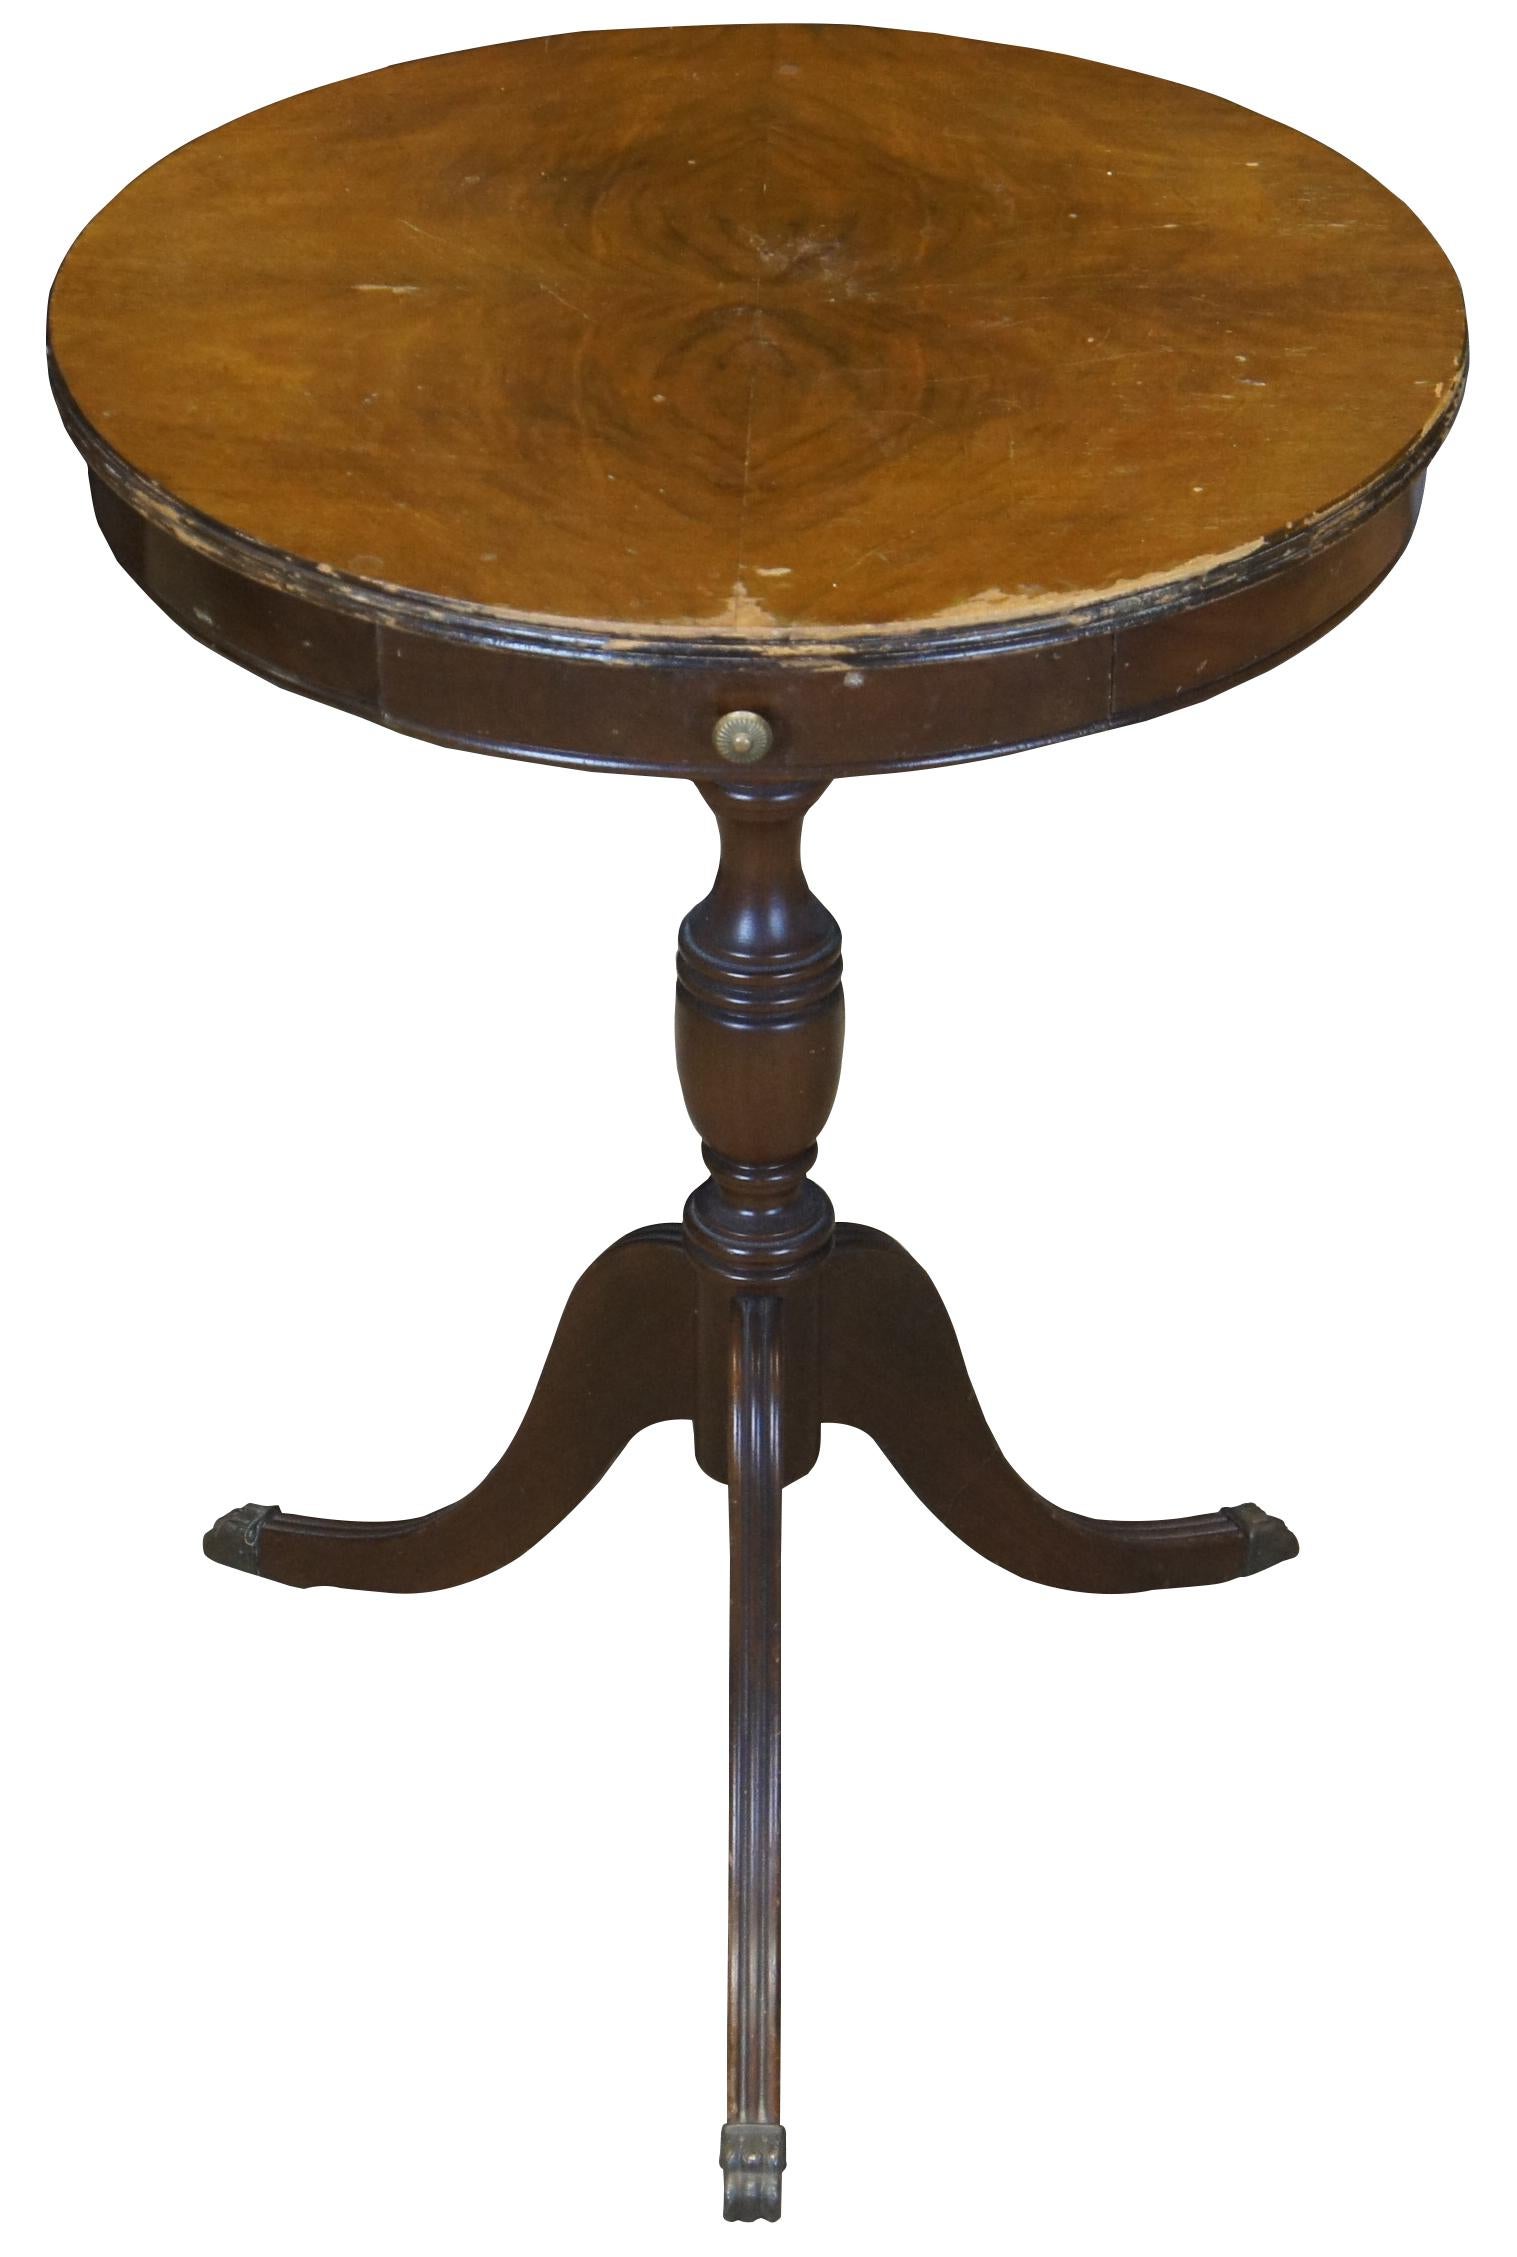 Antique mahogany side pedestal table. Duncan Phyfe styling featuring a round crotch mahogany top with small drawer, turned column and tripod base with fluting and brass capped feat. Measure: 27